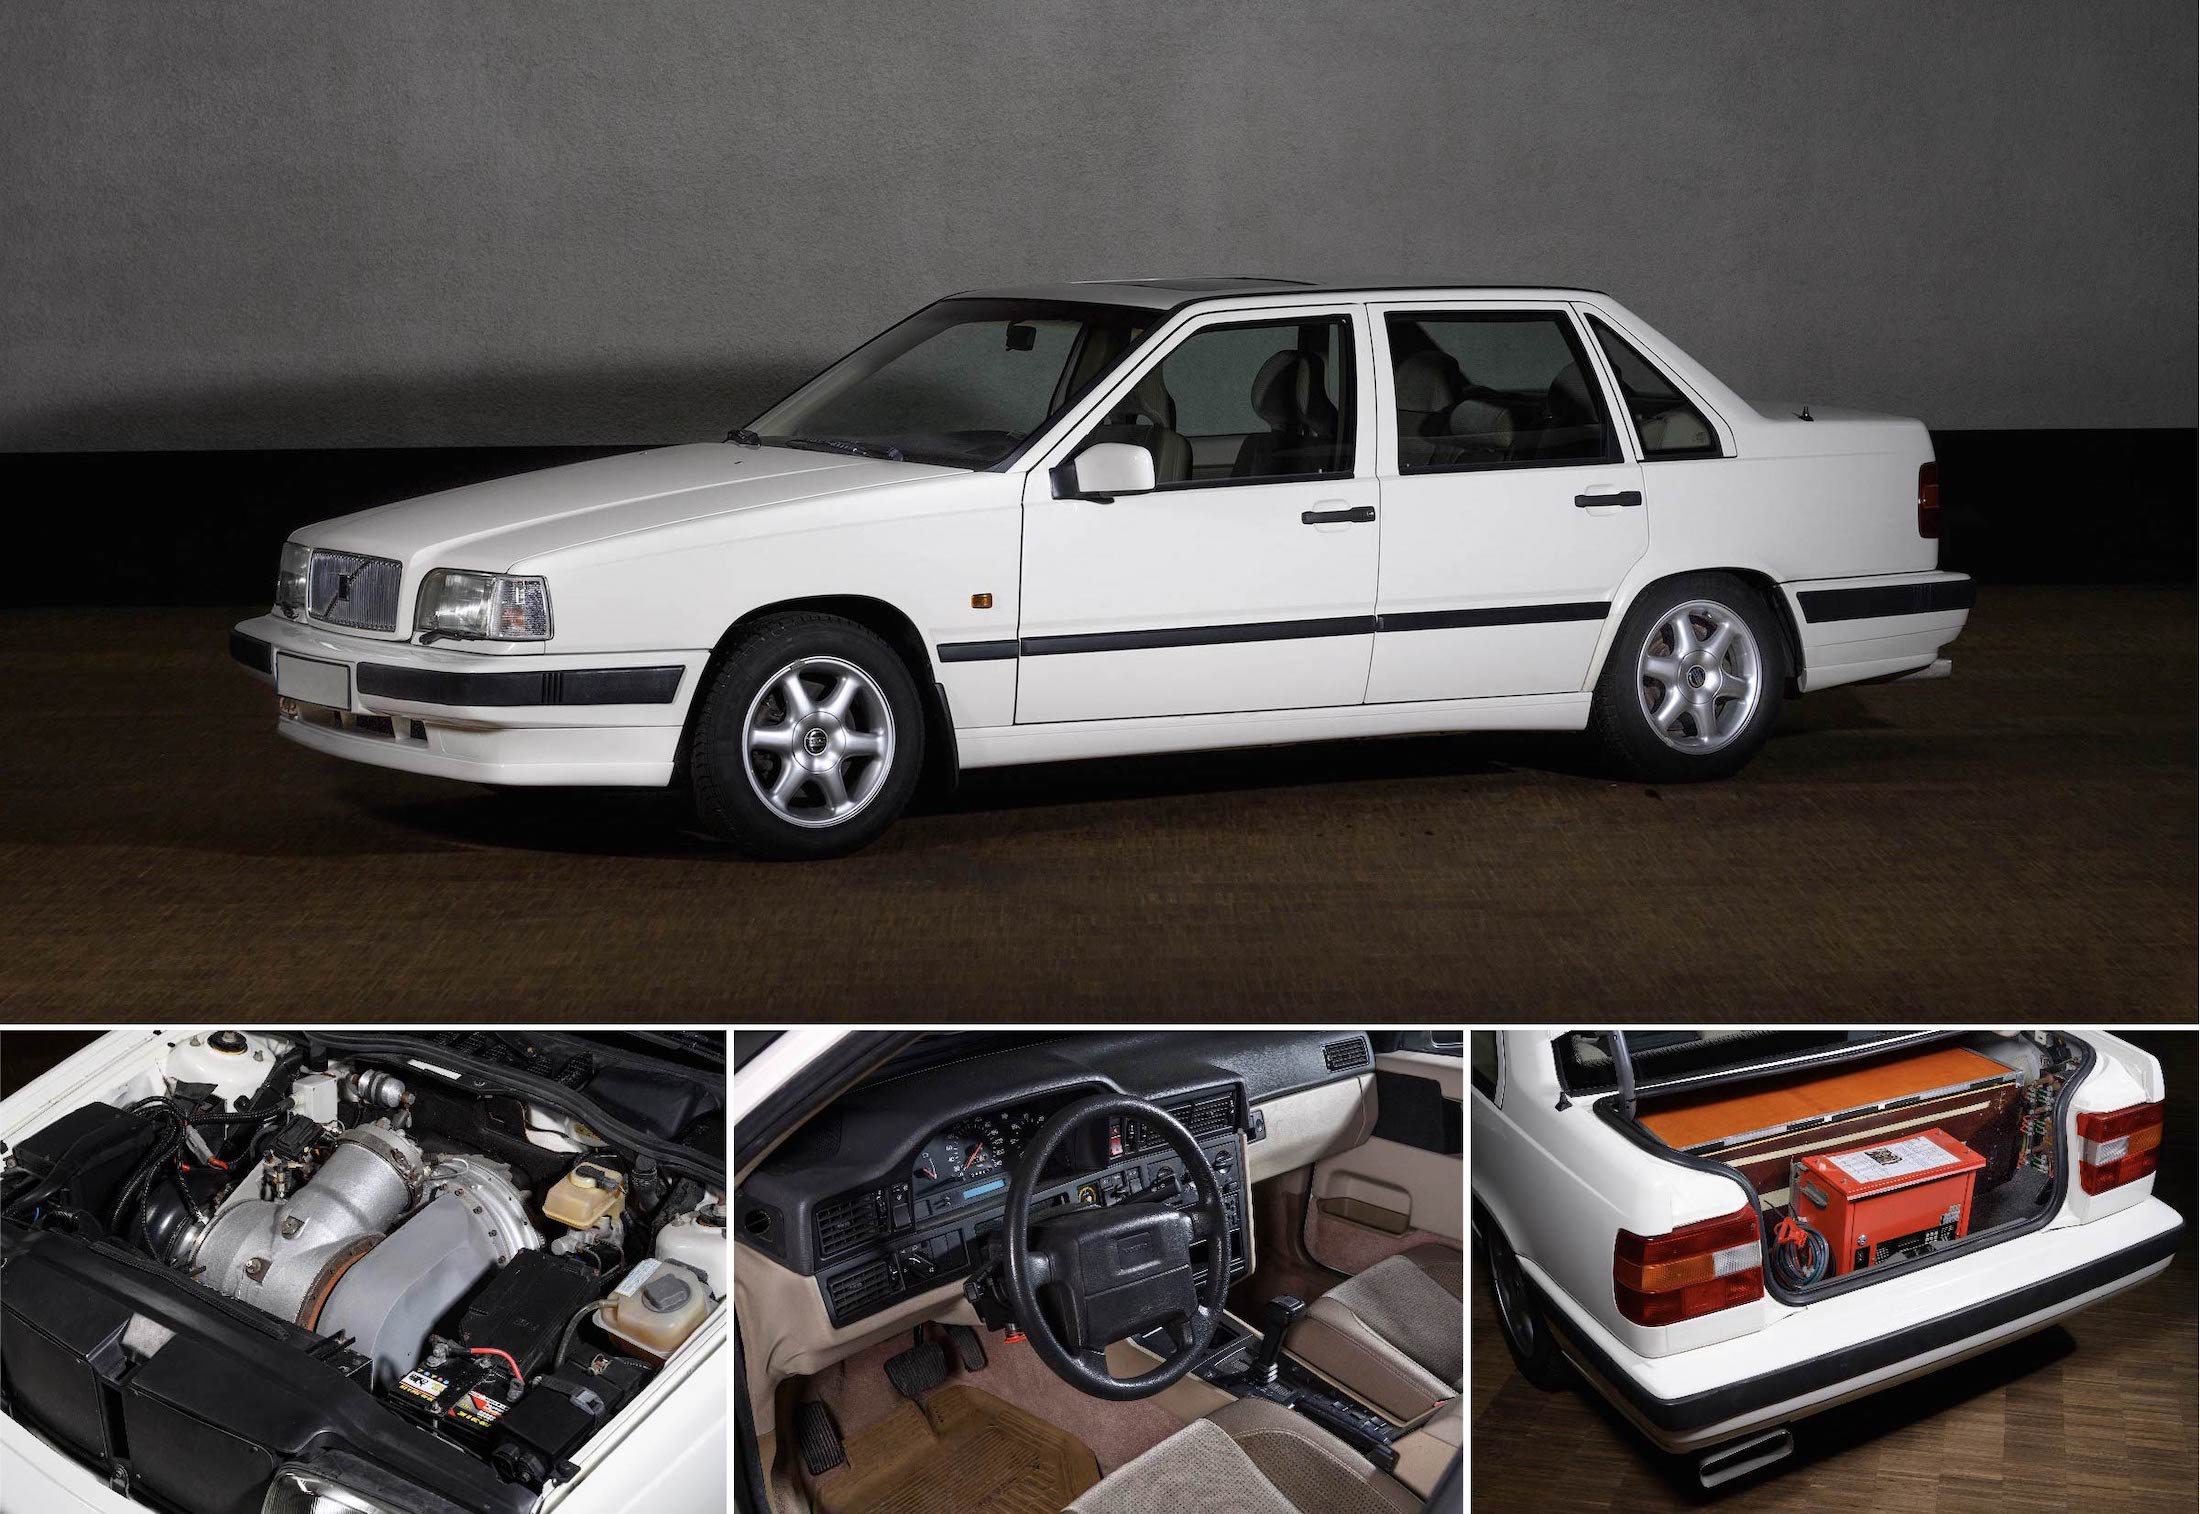 A Gas Turbine/Electric Volvo 850: The 1993 Factory Prototype